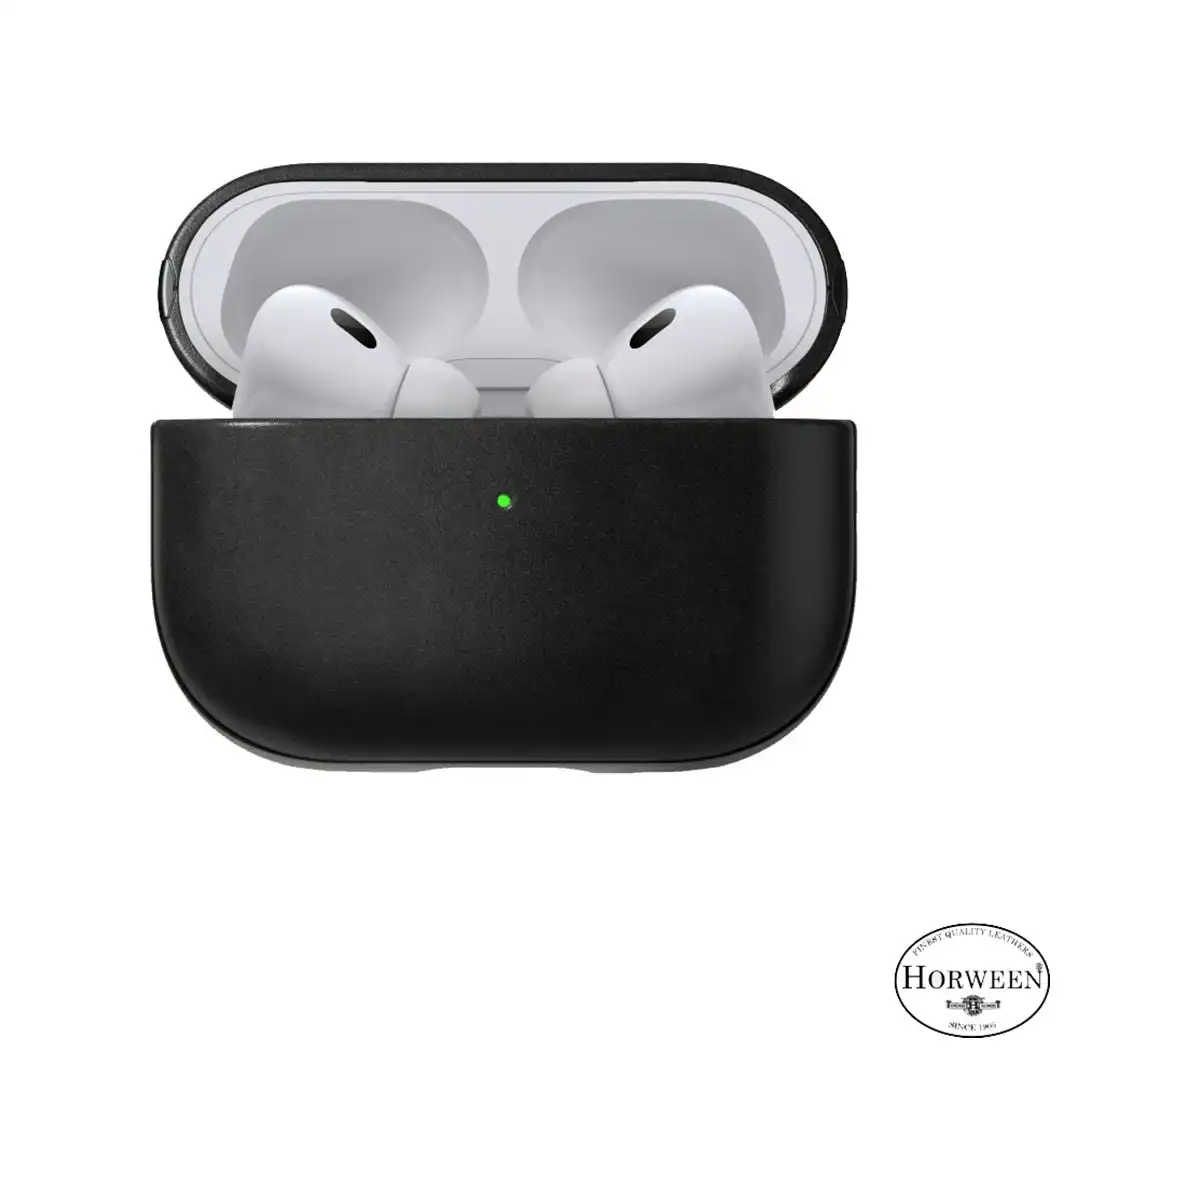 Nomad Modern Leather Case for Apple AirPods Pro 2 - Black Horween Leather